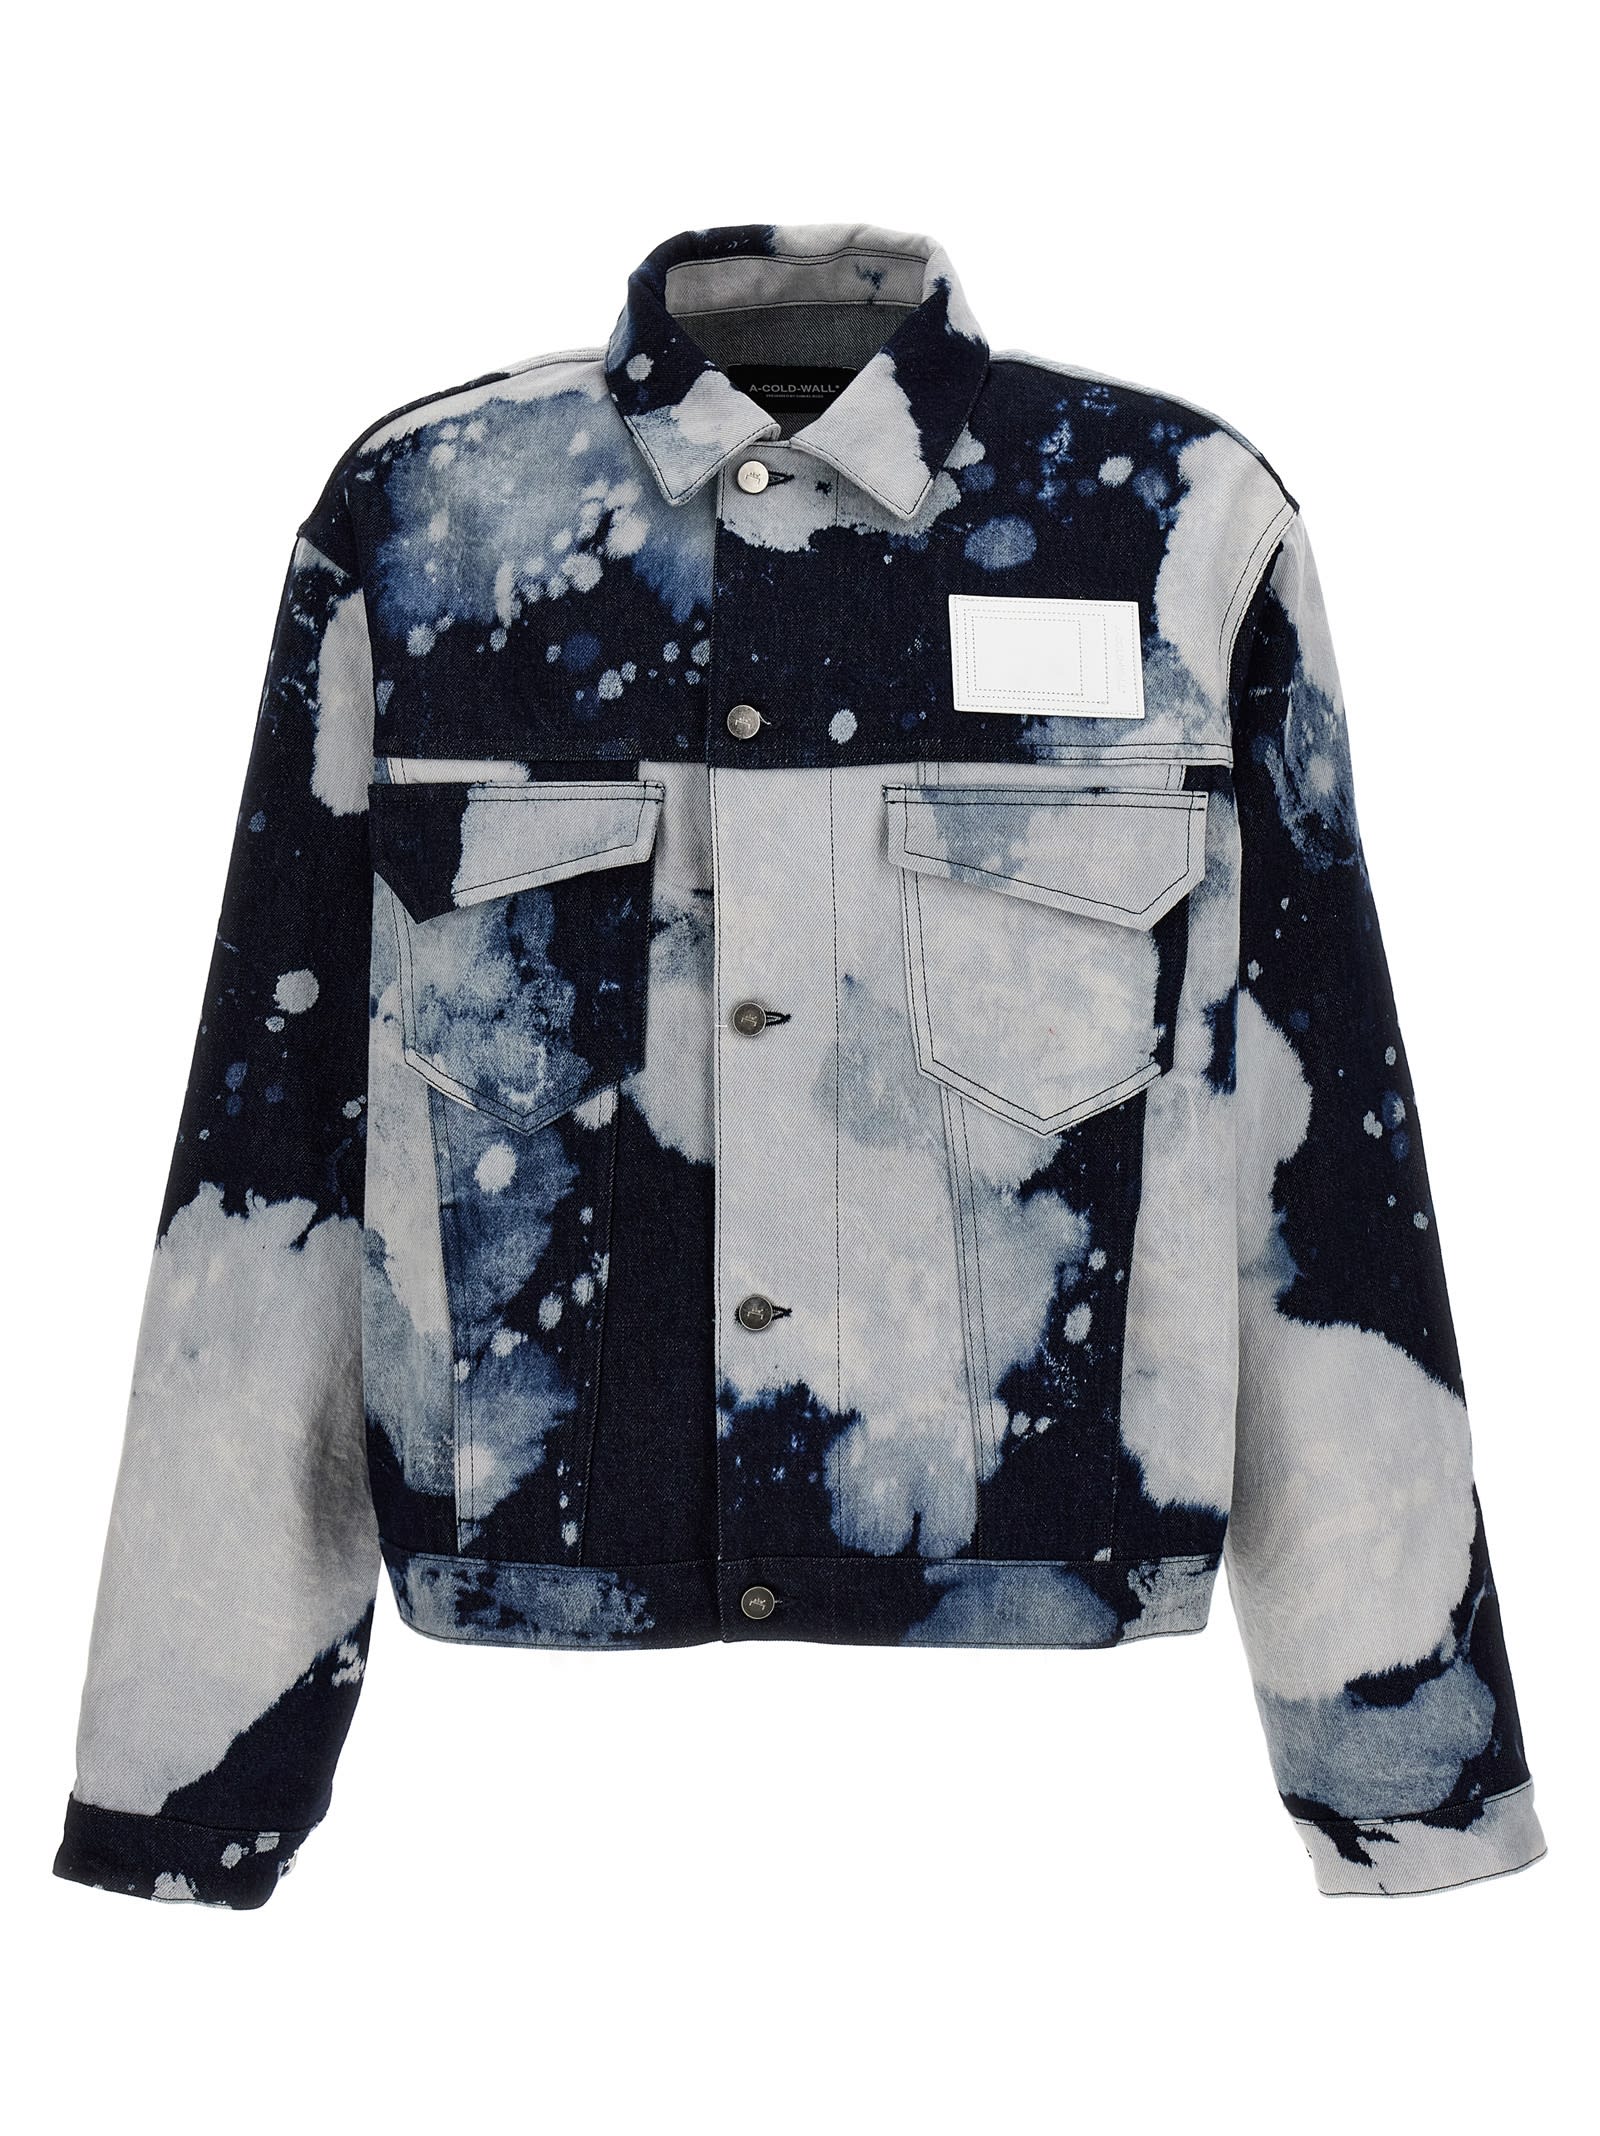 A-COLD-WALL* BLEACHED DENIM JACKET